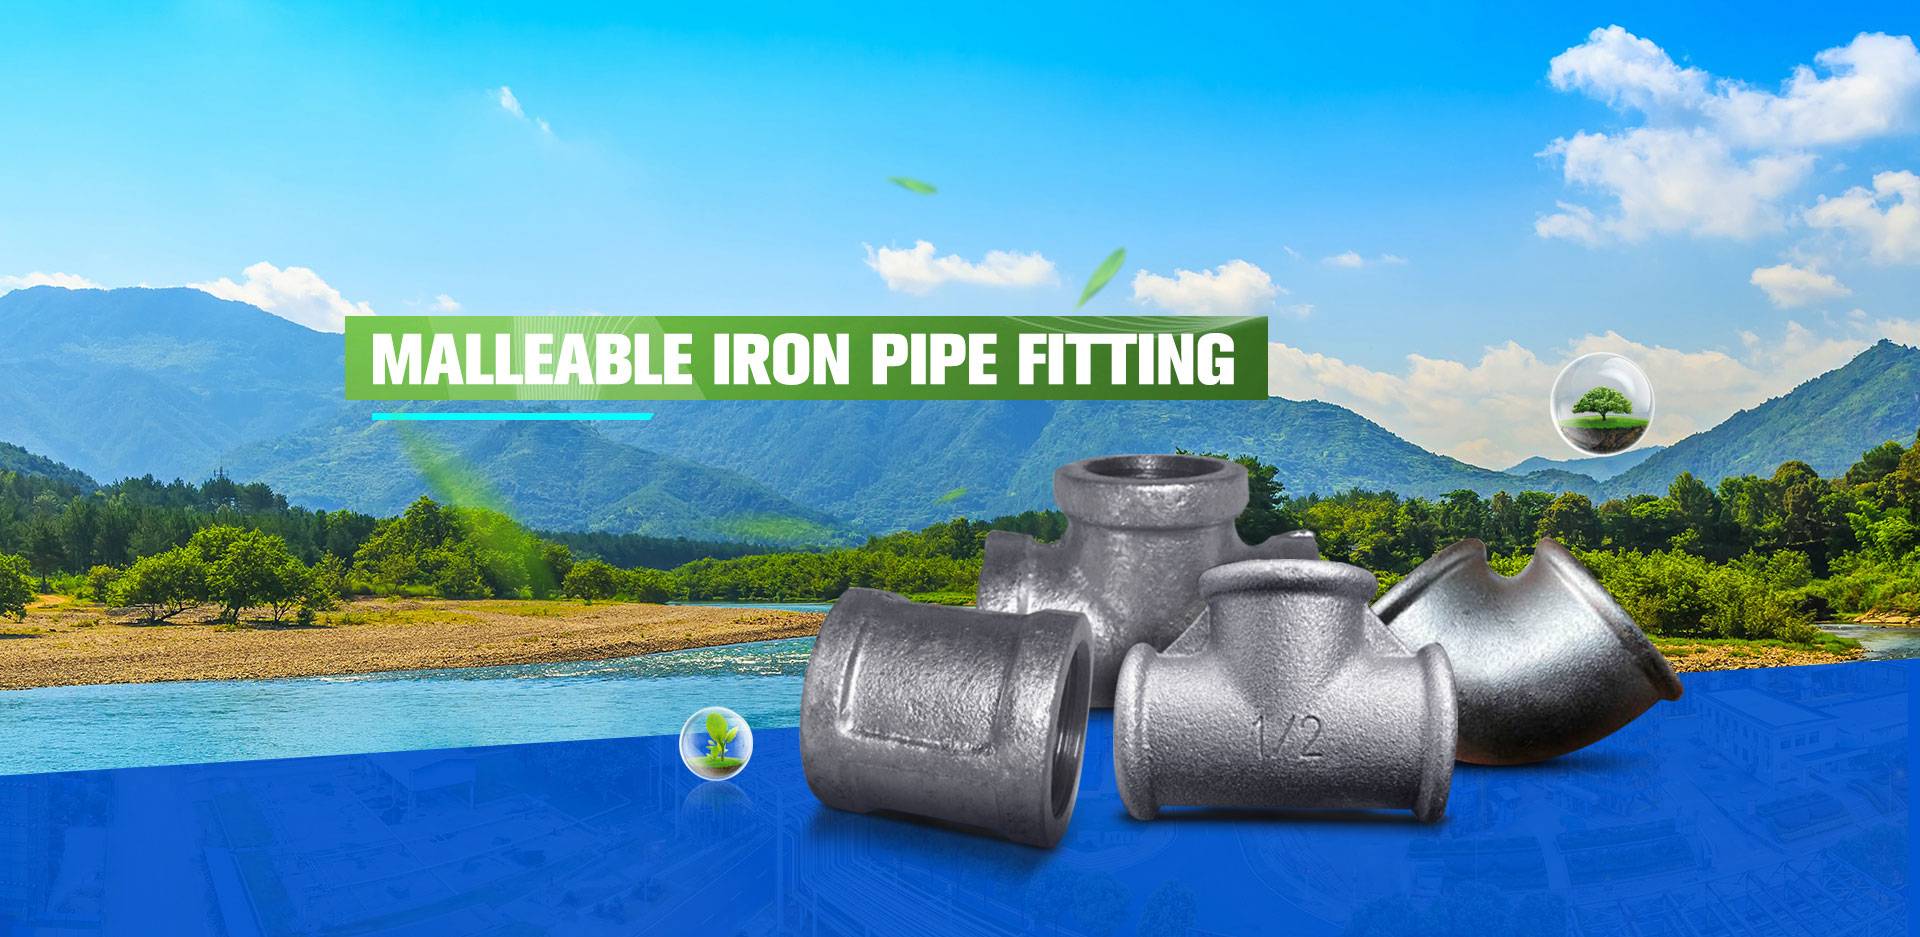 Malleable cast iron pipe fitting